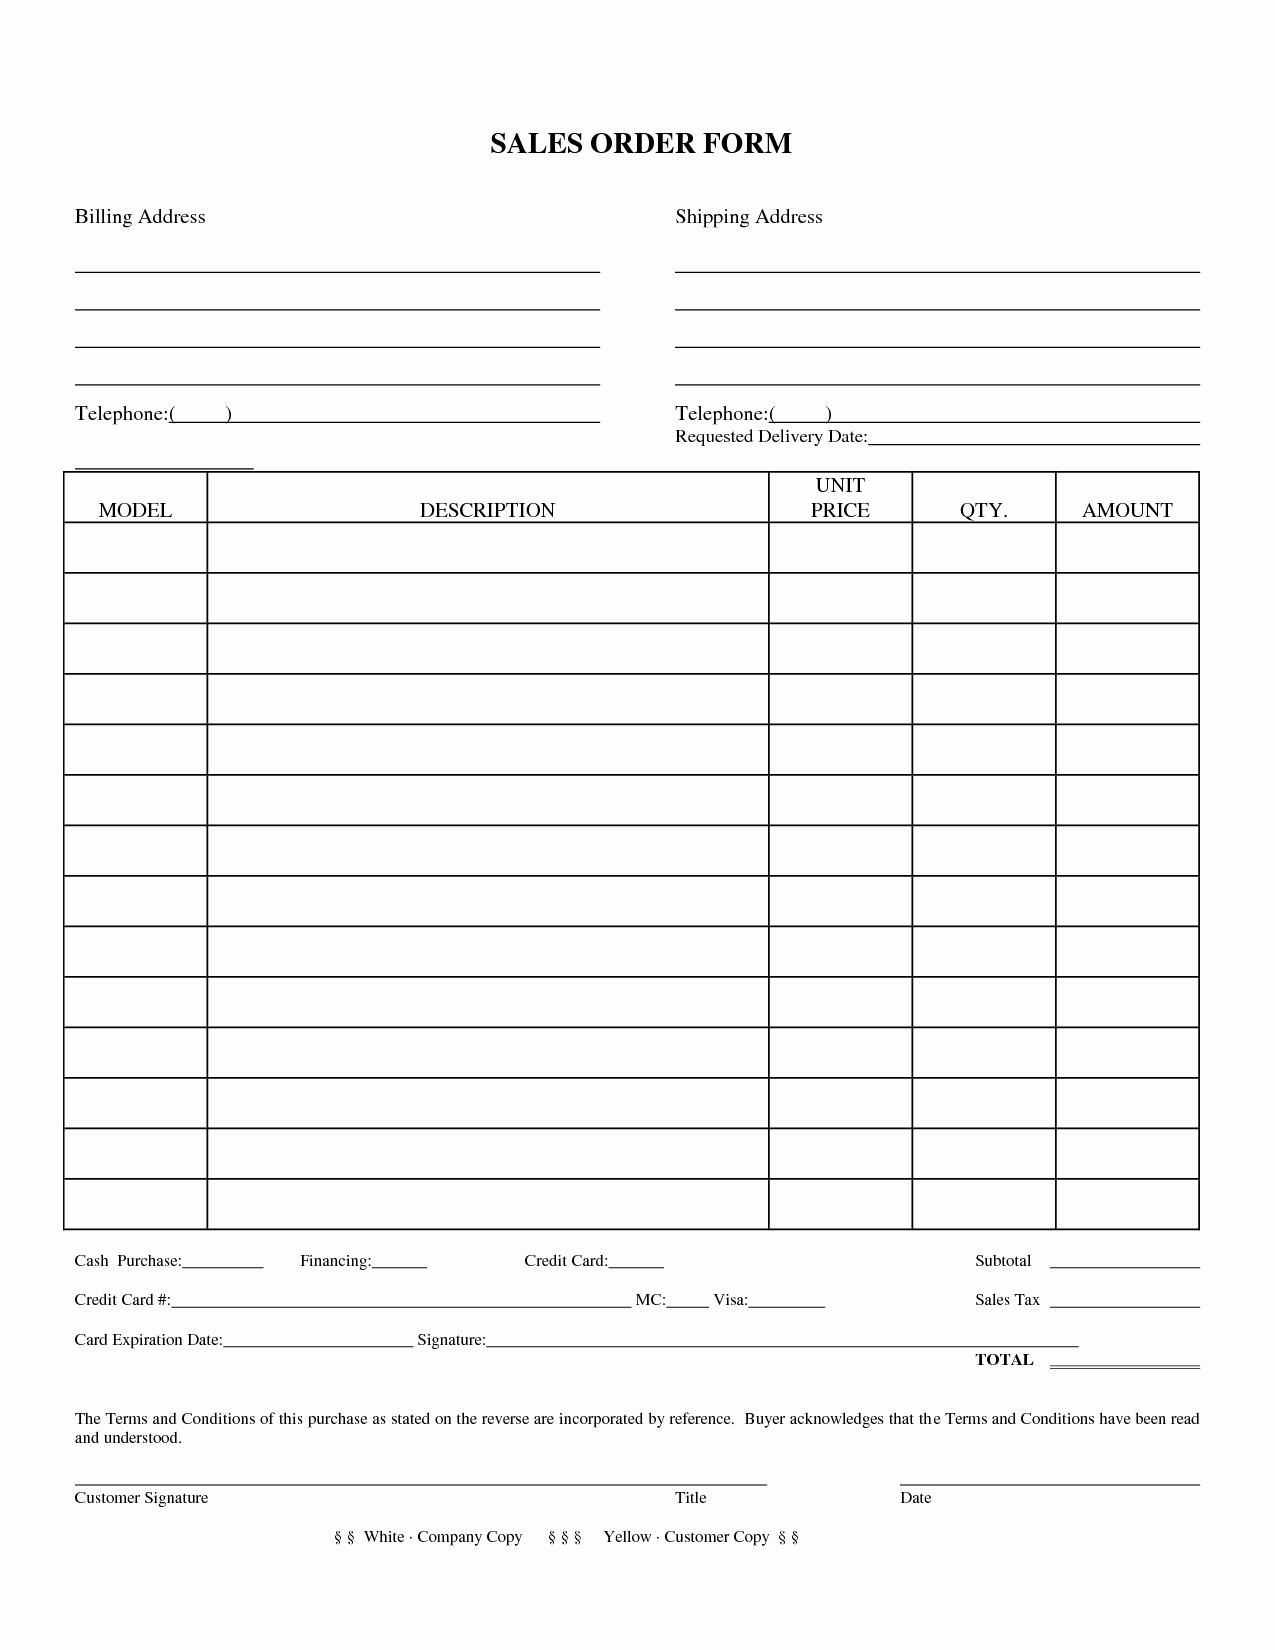 Sales order form Template Free Beautiful Sales forms Sales order form Doc Doc